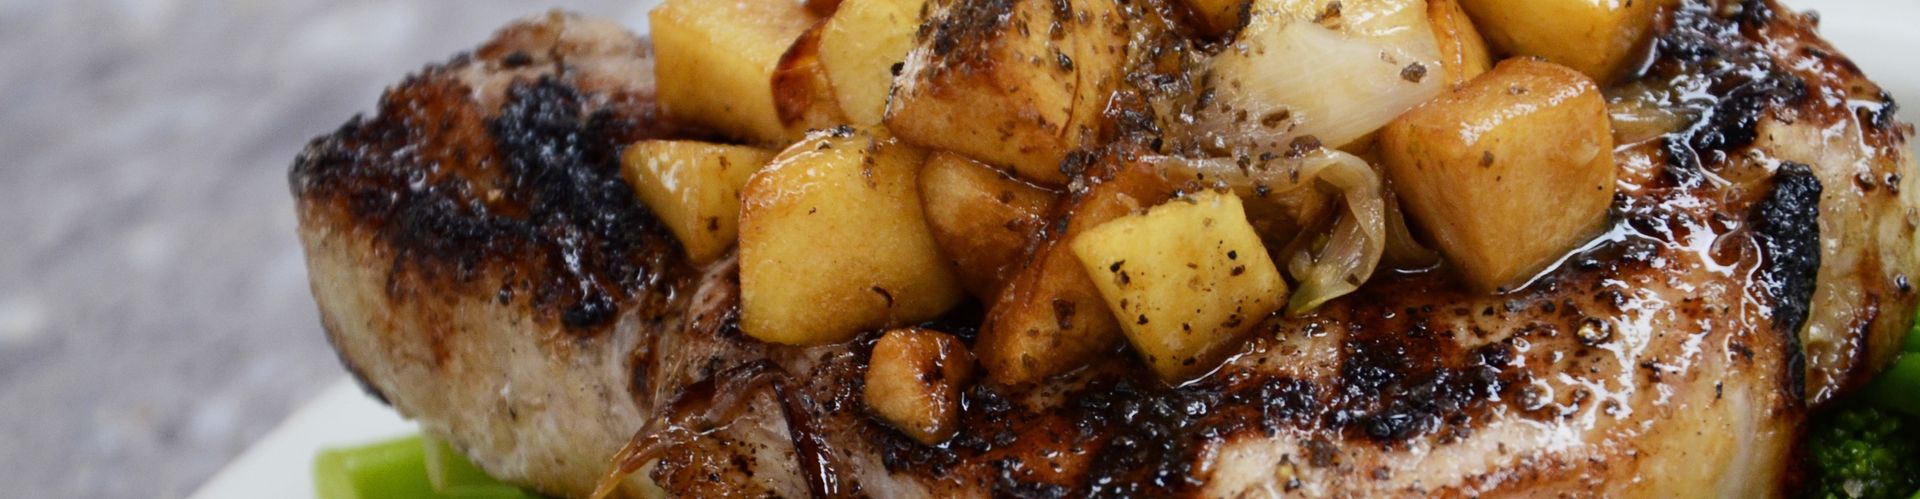 Close up of a rich pork chop topped with cubed roasted potatoes, onion and gravy